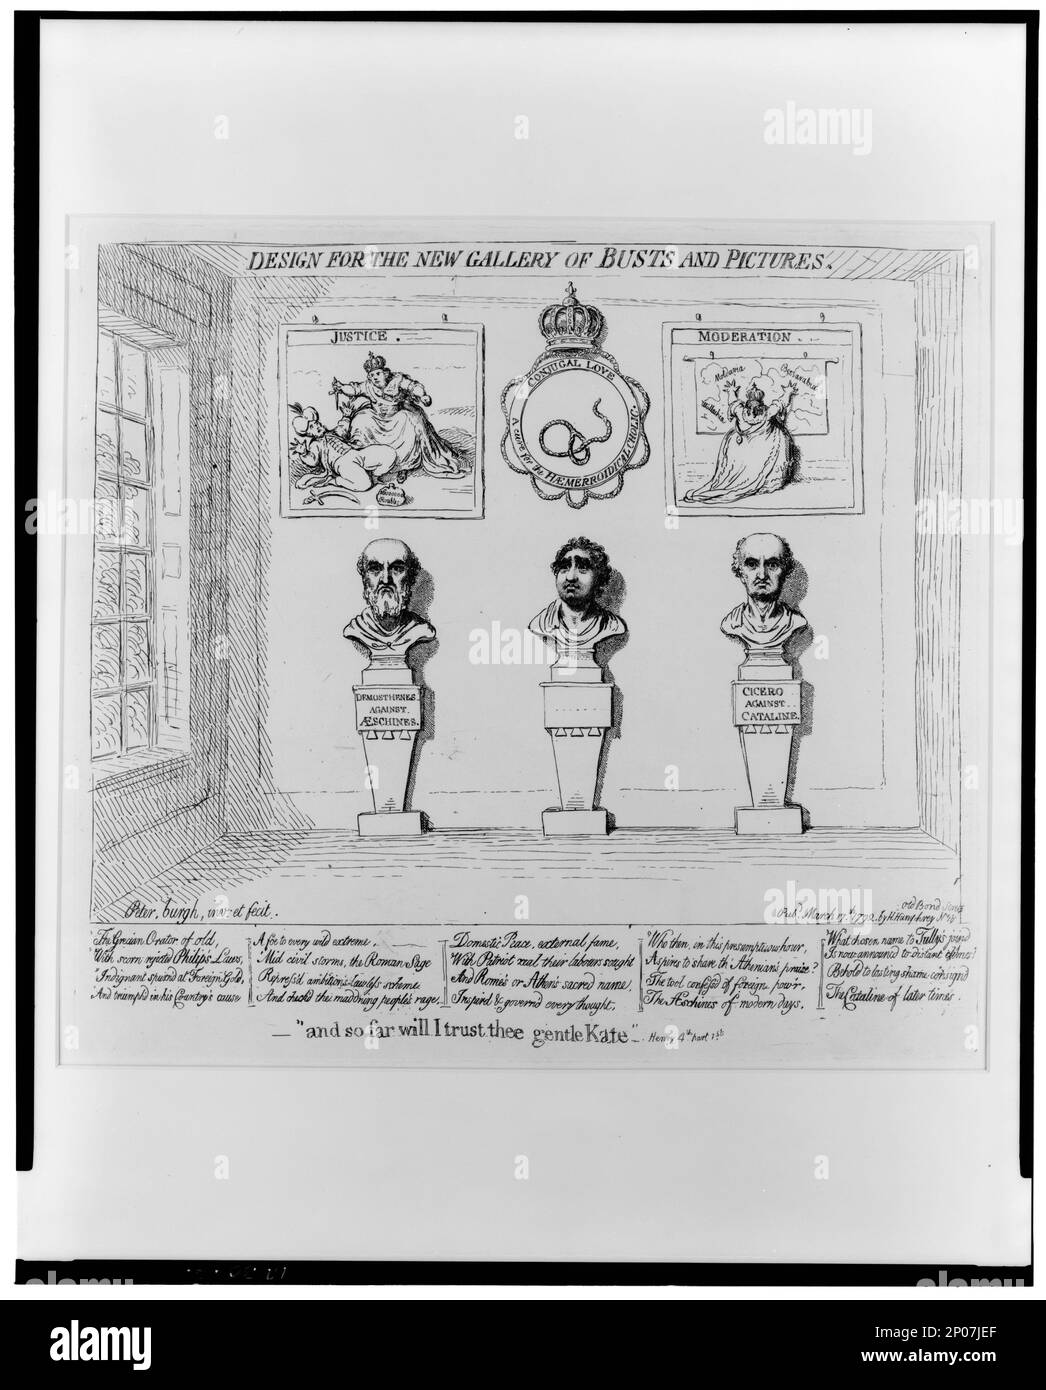 Design for the new gallery of busts and pictures -'and so far will I trust thee gentle Kate' -Henry 4th, part 1st     Peter,burgh, inv. et fecit.. Forms part of British Cartoon Prints Collection , Catalogue of prints and drawings in the British Museum. Division I, political and personal satires, v. 6, no. 8072, Exhibit loan 4161-L. Catherine,II,Empress of Russia,1729-1796. , Fox, Charles James,1749-1806. , Demosthenes. , Cicero, Marcus Tullius. , Galleries & museums,1790-1800. , International relations,Russia,1790-1800. , International relations,Great Britain,1790-1800. Stock Photo